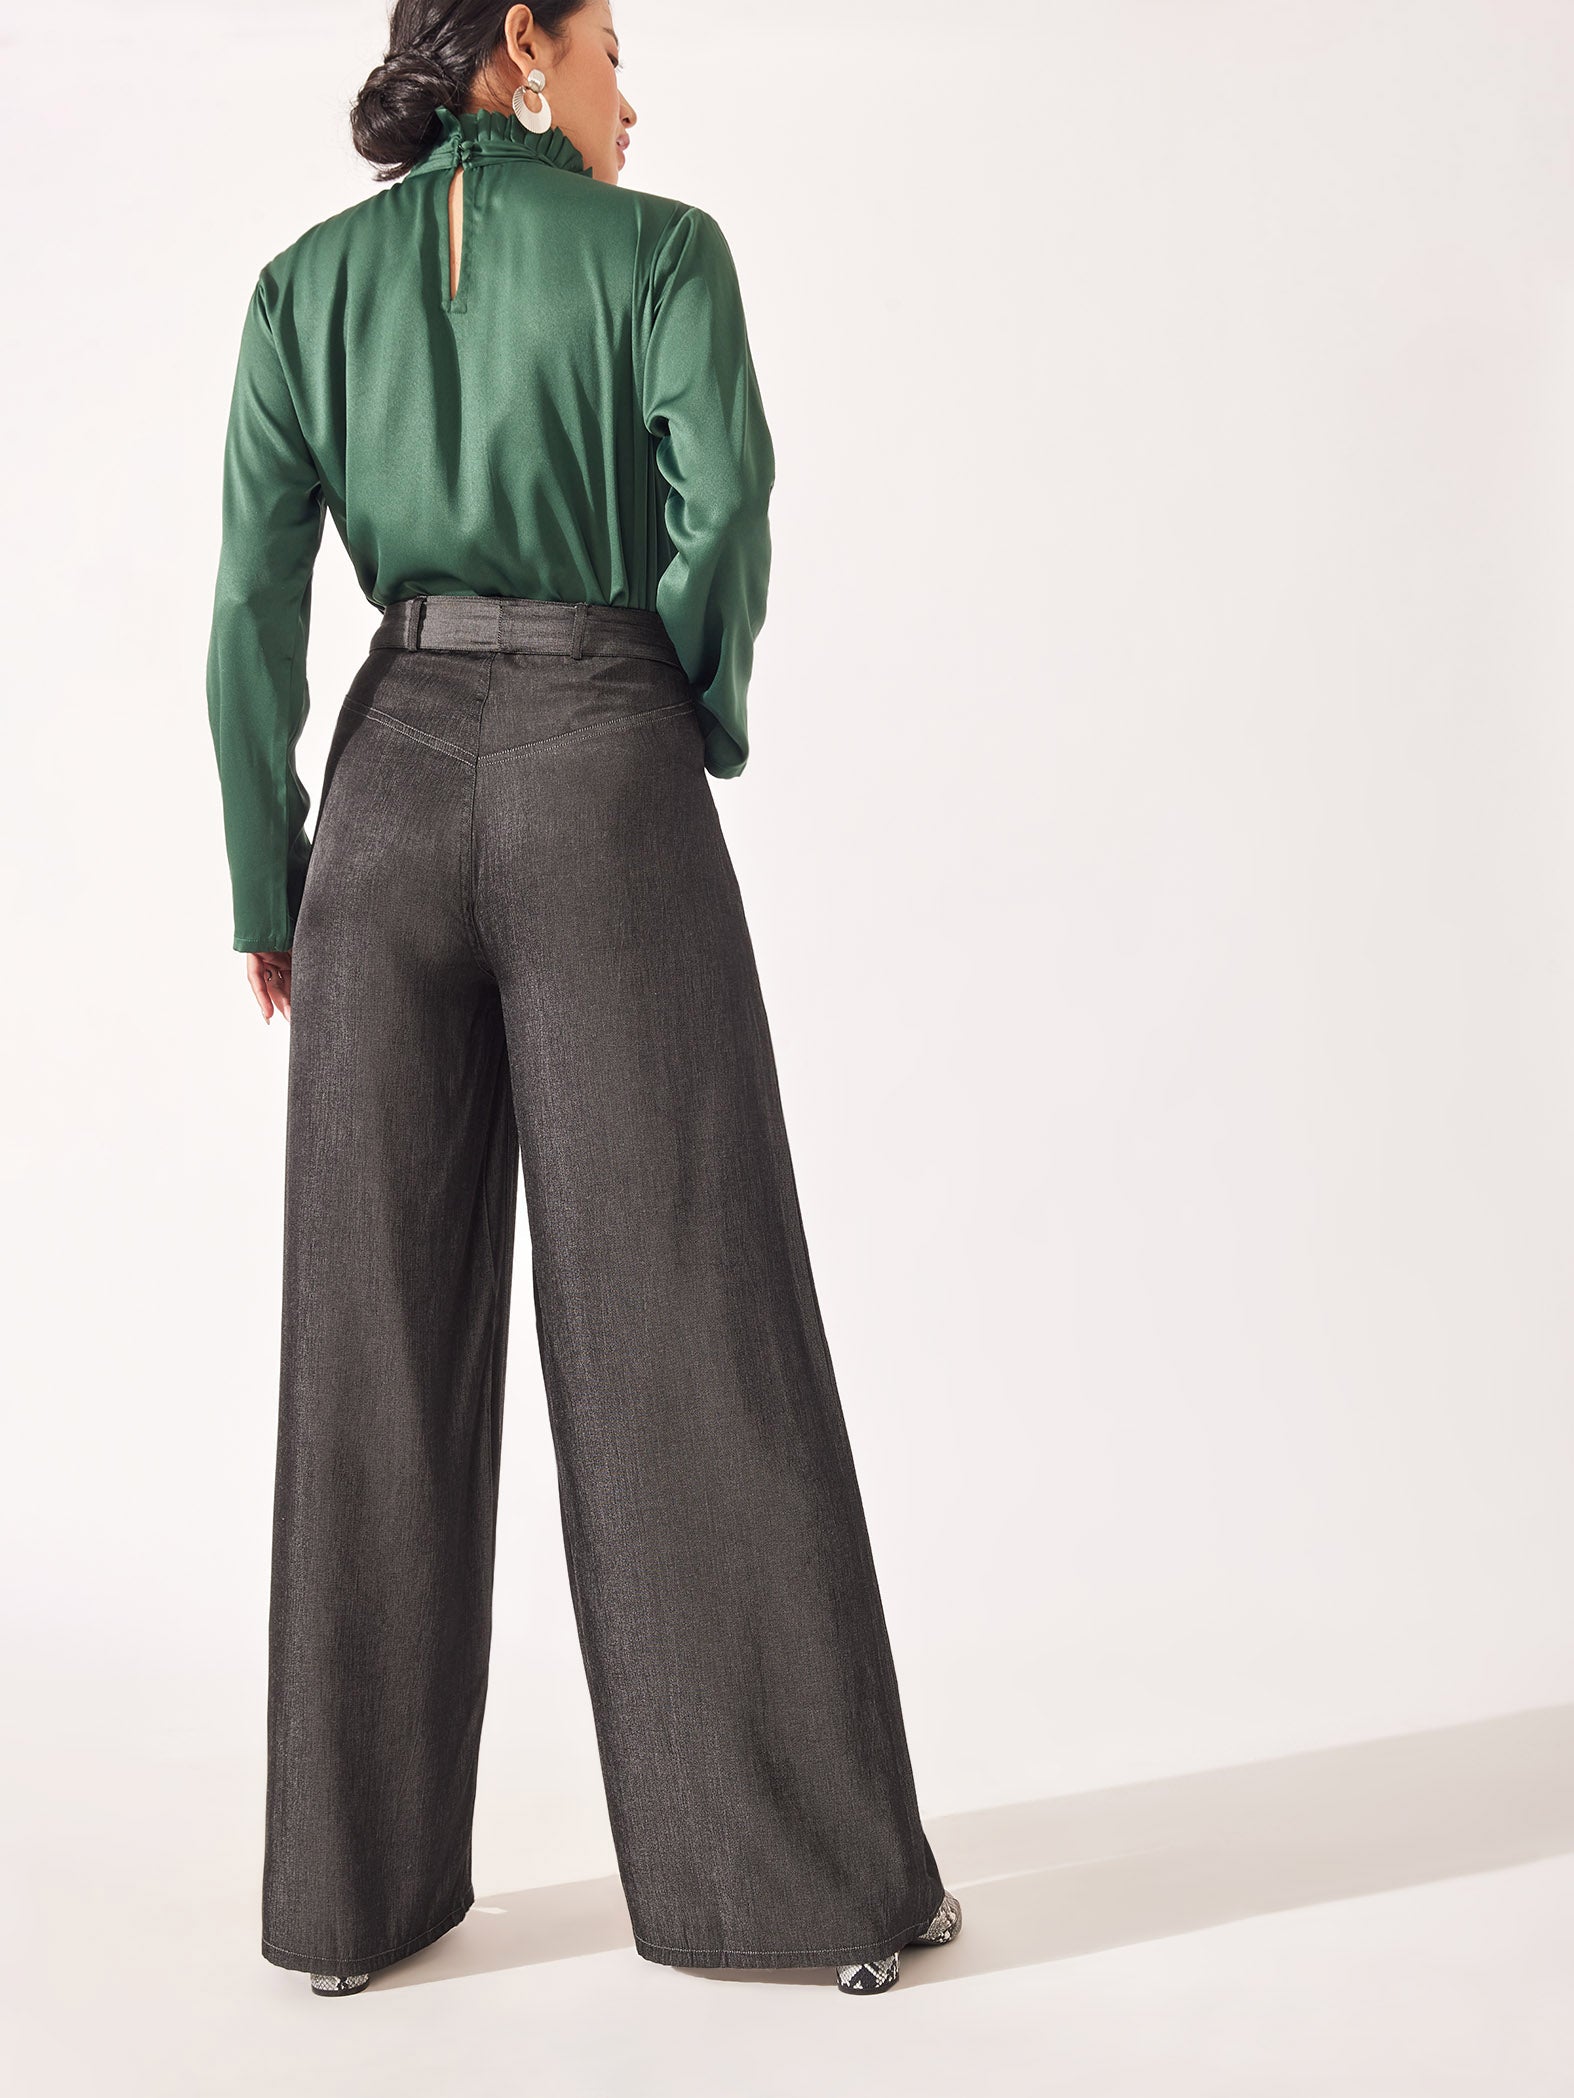 Charcoal Belted Pants